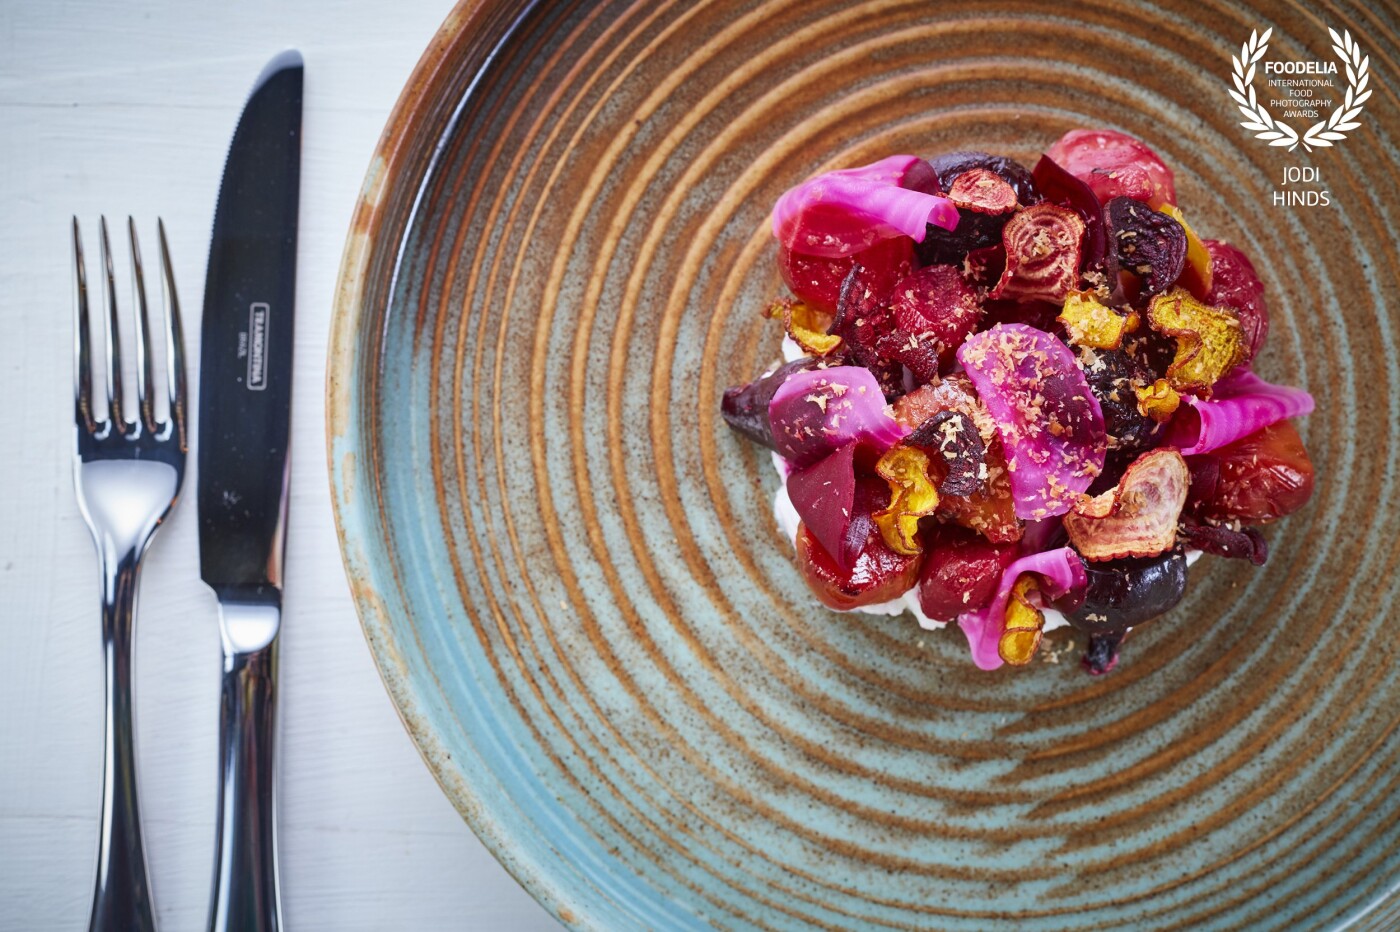 Gorgeous beets dish from Mike Reid's latest M Restaurant in Twickenham, London.  The crockery is so gorgeous with this dish too.<br />
<br />
Photographer: @jodihindsphoto<br />
Chef: @mikereidchef<br />
Restaurant: @mbarandgrill<br />
